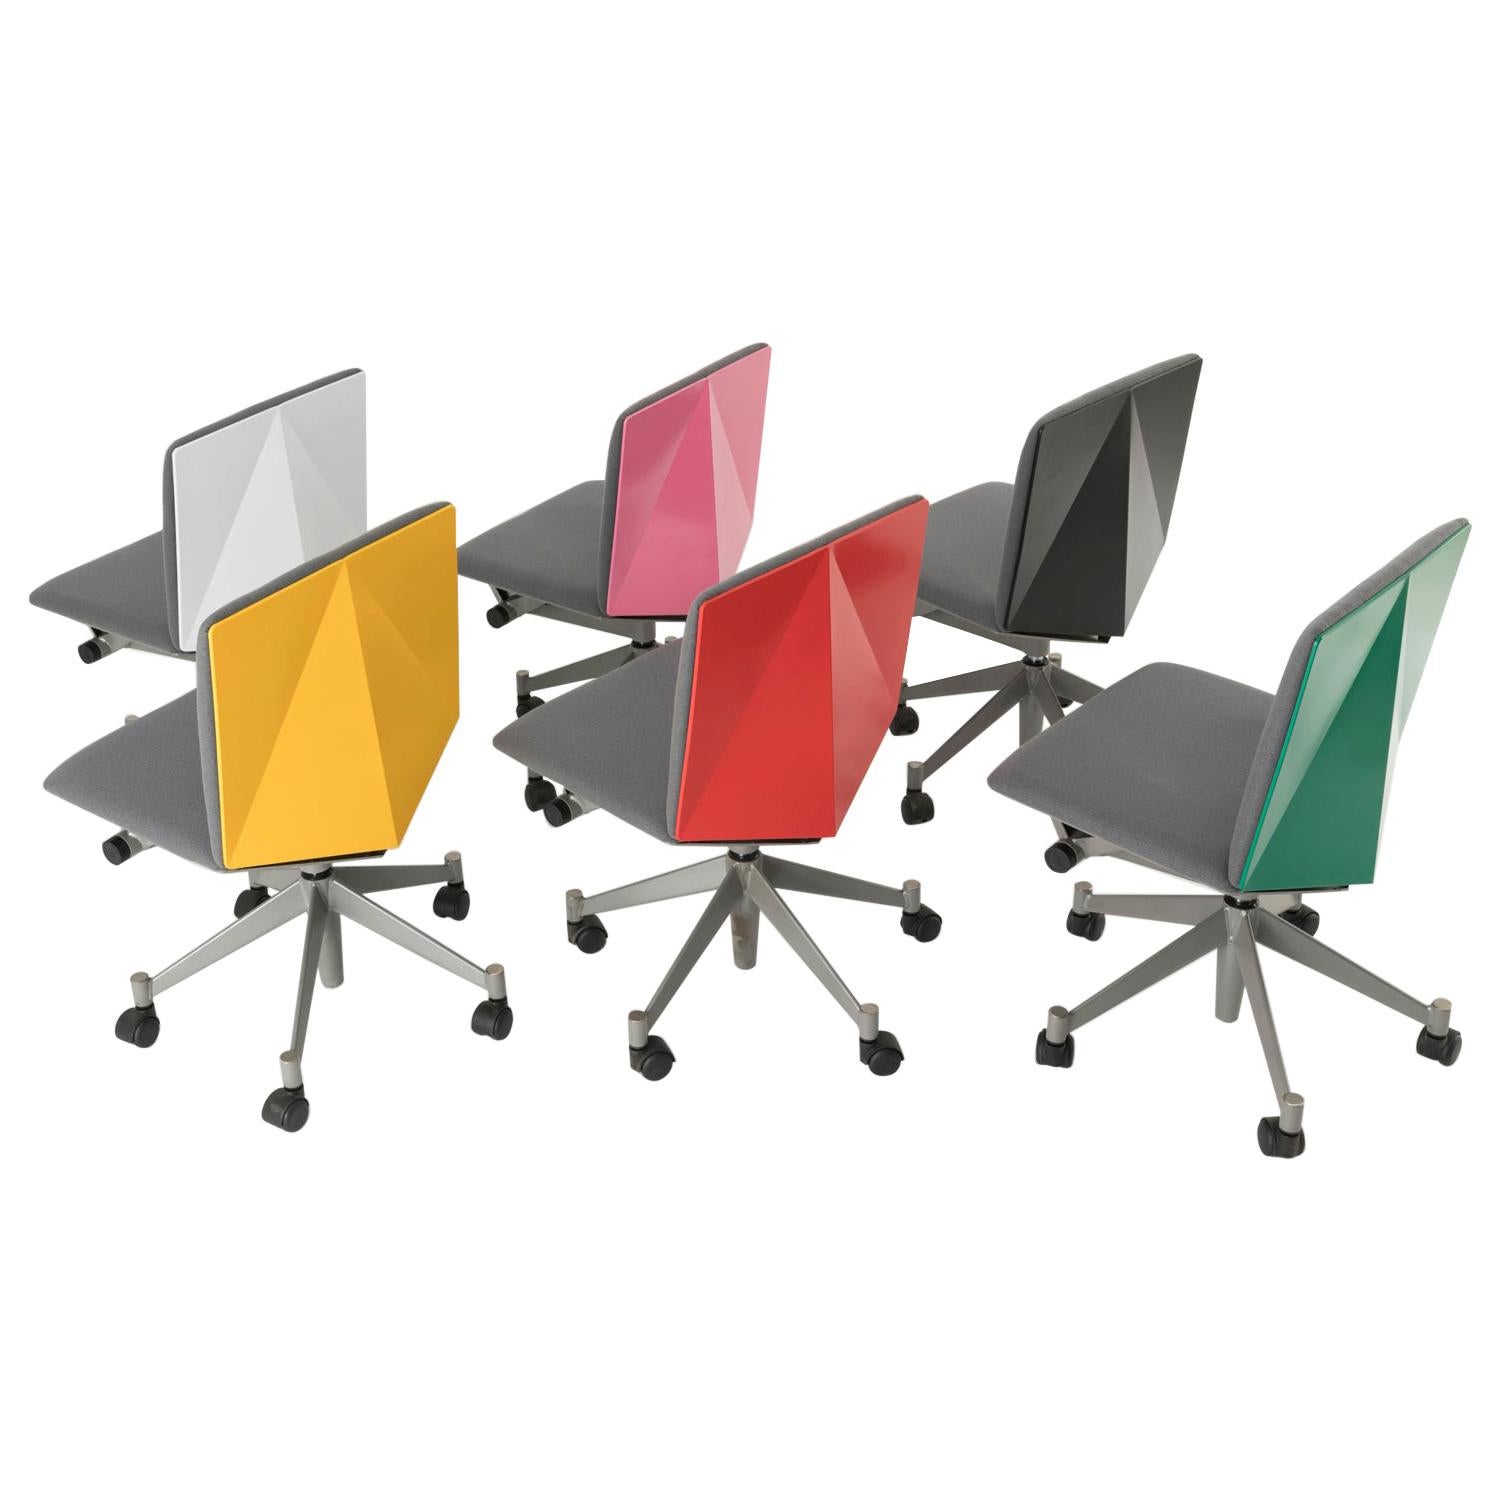 Set of Six Multicolored "Kite" Office Chairs by Norman Foster for Tecno, 1986